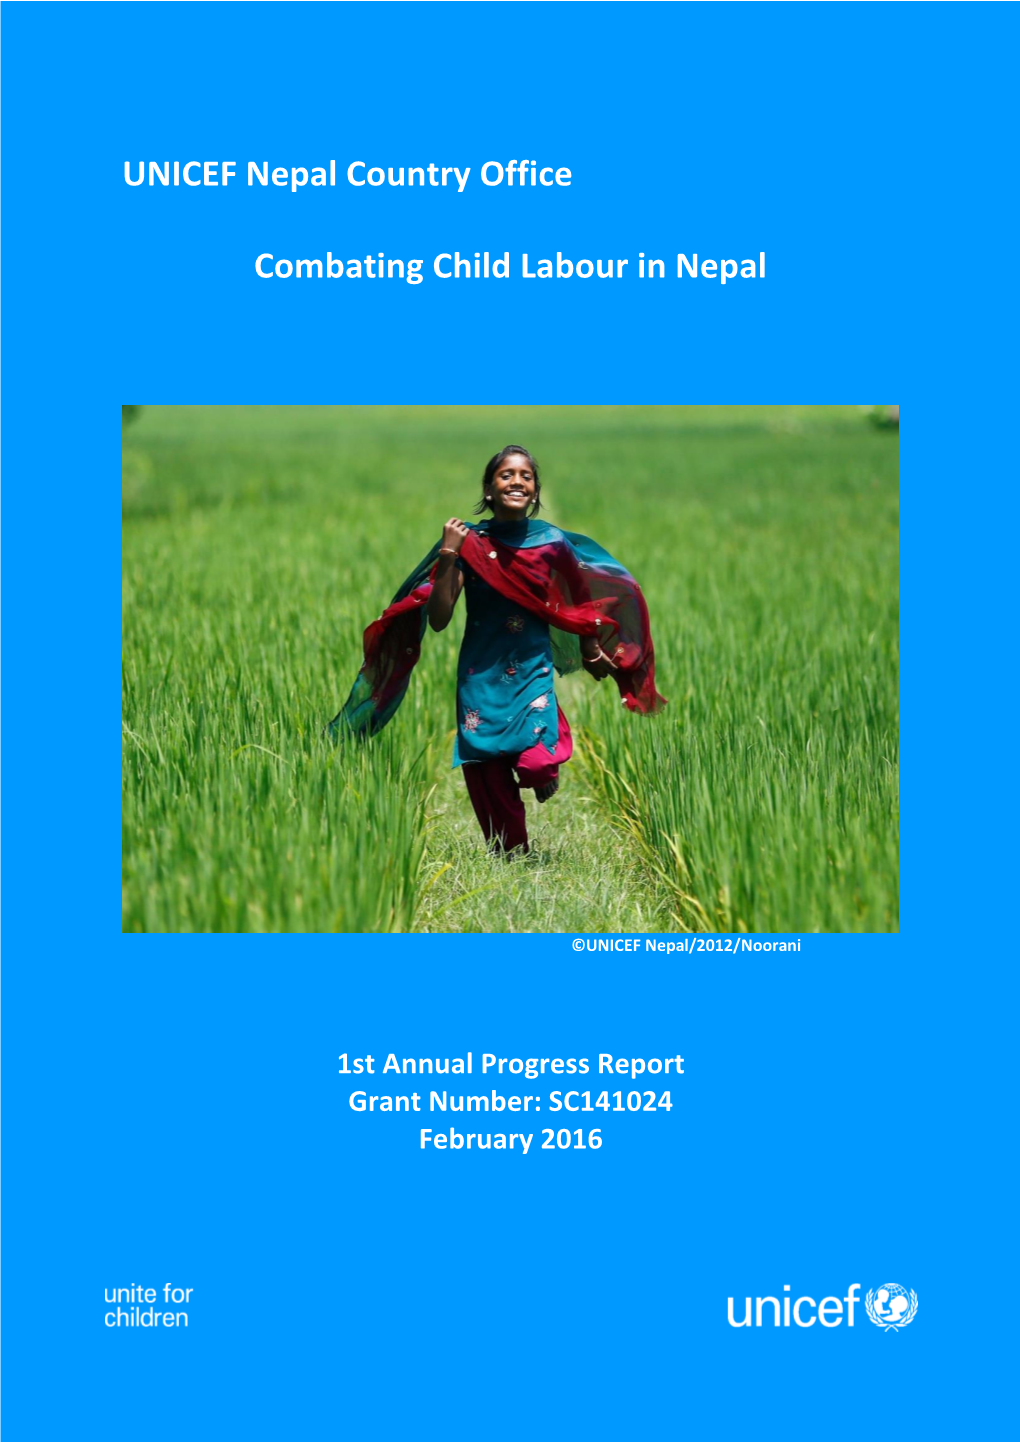 UNICEF Nepal Country Office Combating Child Labour in Nepal